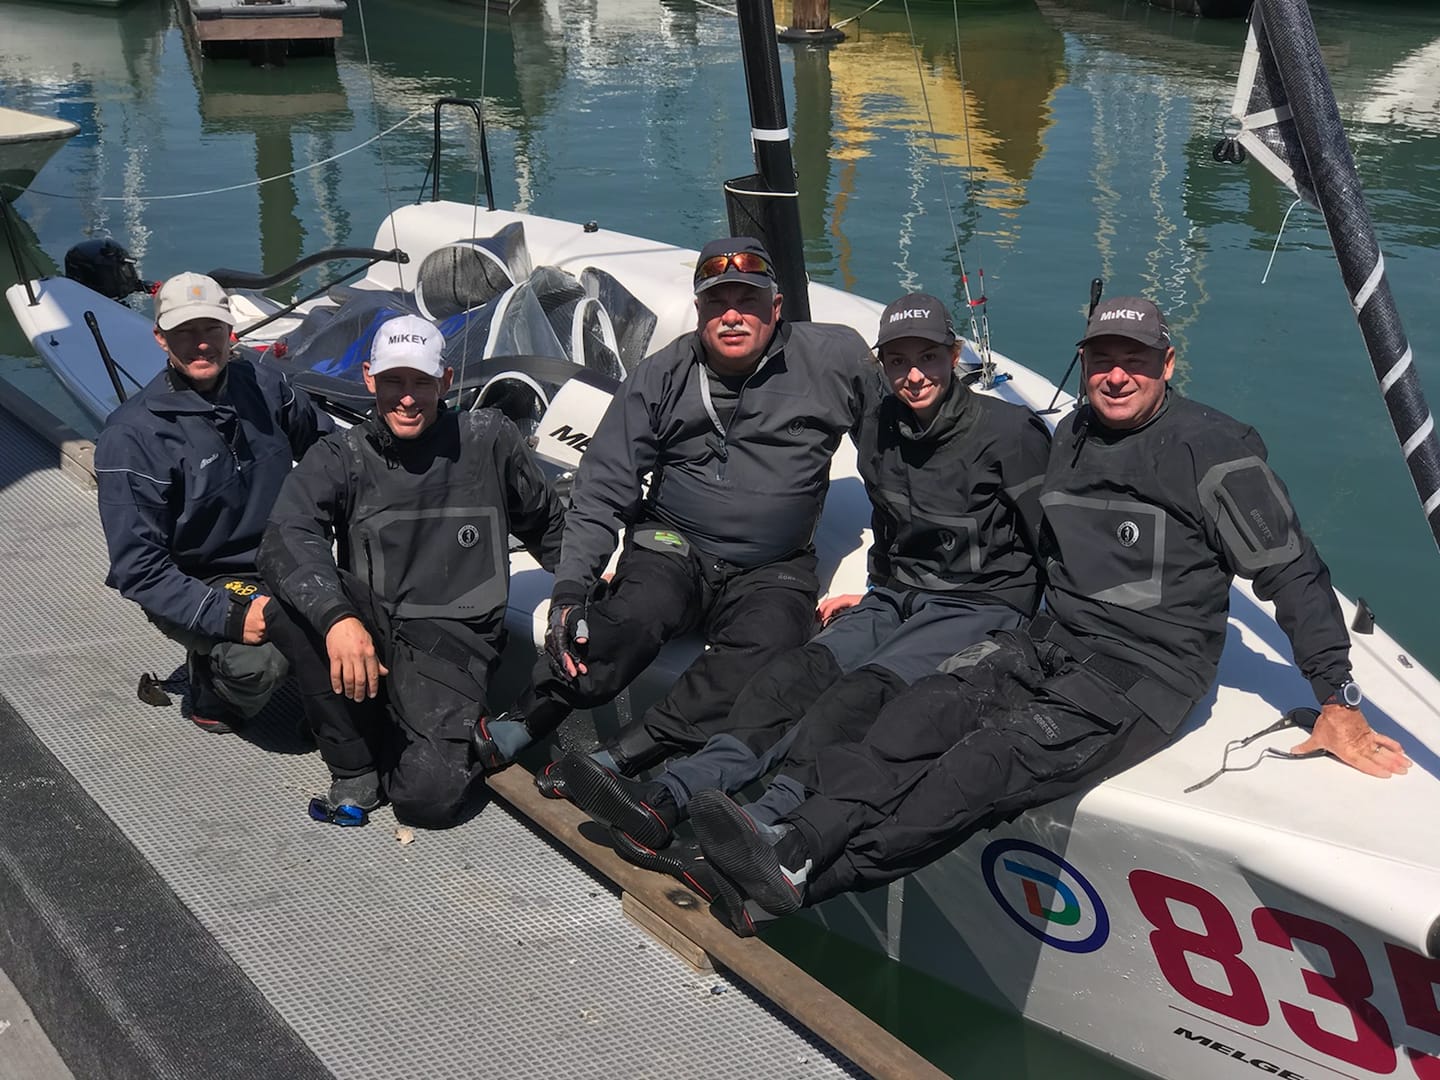  Kevin Welch's MIKEY team - Melges 24 US Champion 2018